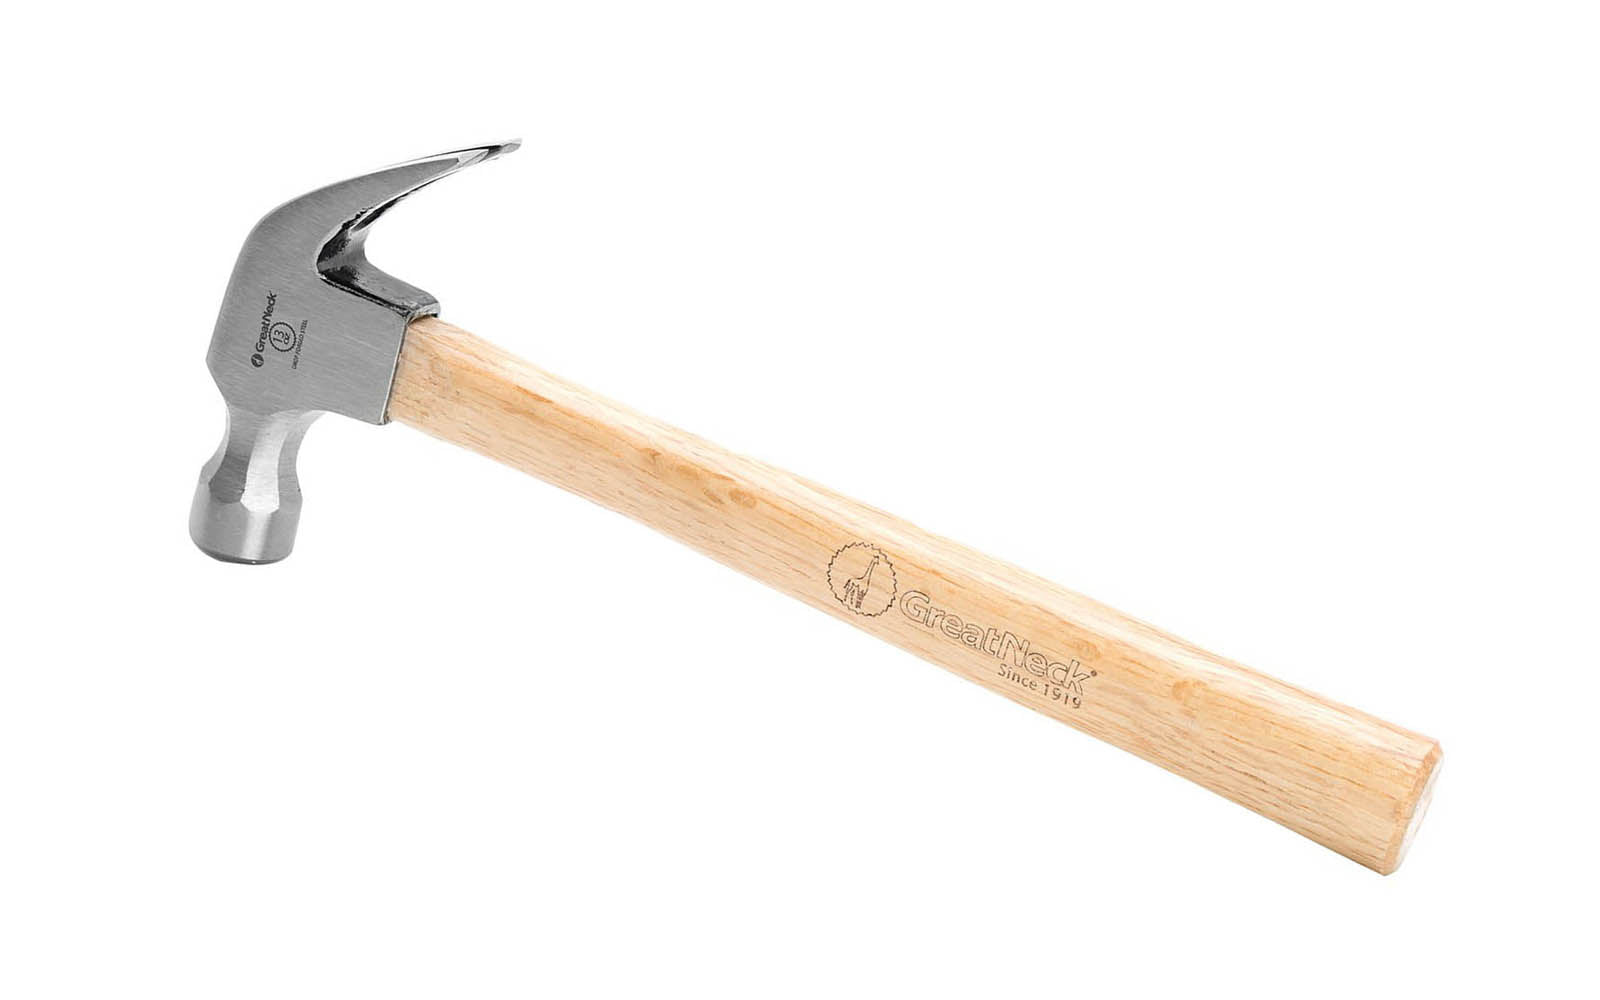 GreatNeck wood curved claw hammer provides leverage for removing nails from wood as well as other light duty work. Hammer is ideal for a carpenter, contractor, or handyman. Drop forged steel head for strength & durability with a clear coat to protect against rust. Wood handle. Great Neck Model M13C. Smooth Face